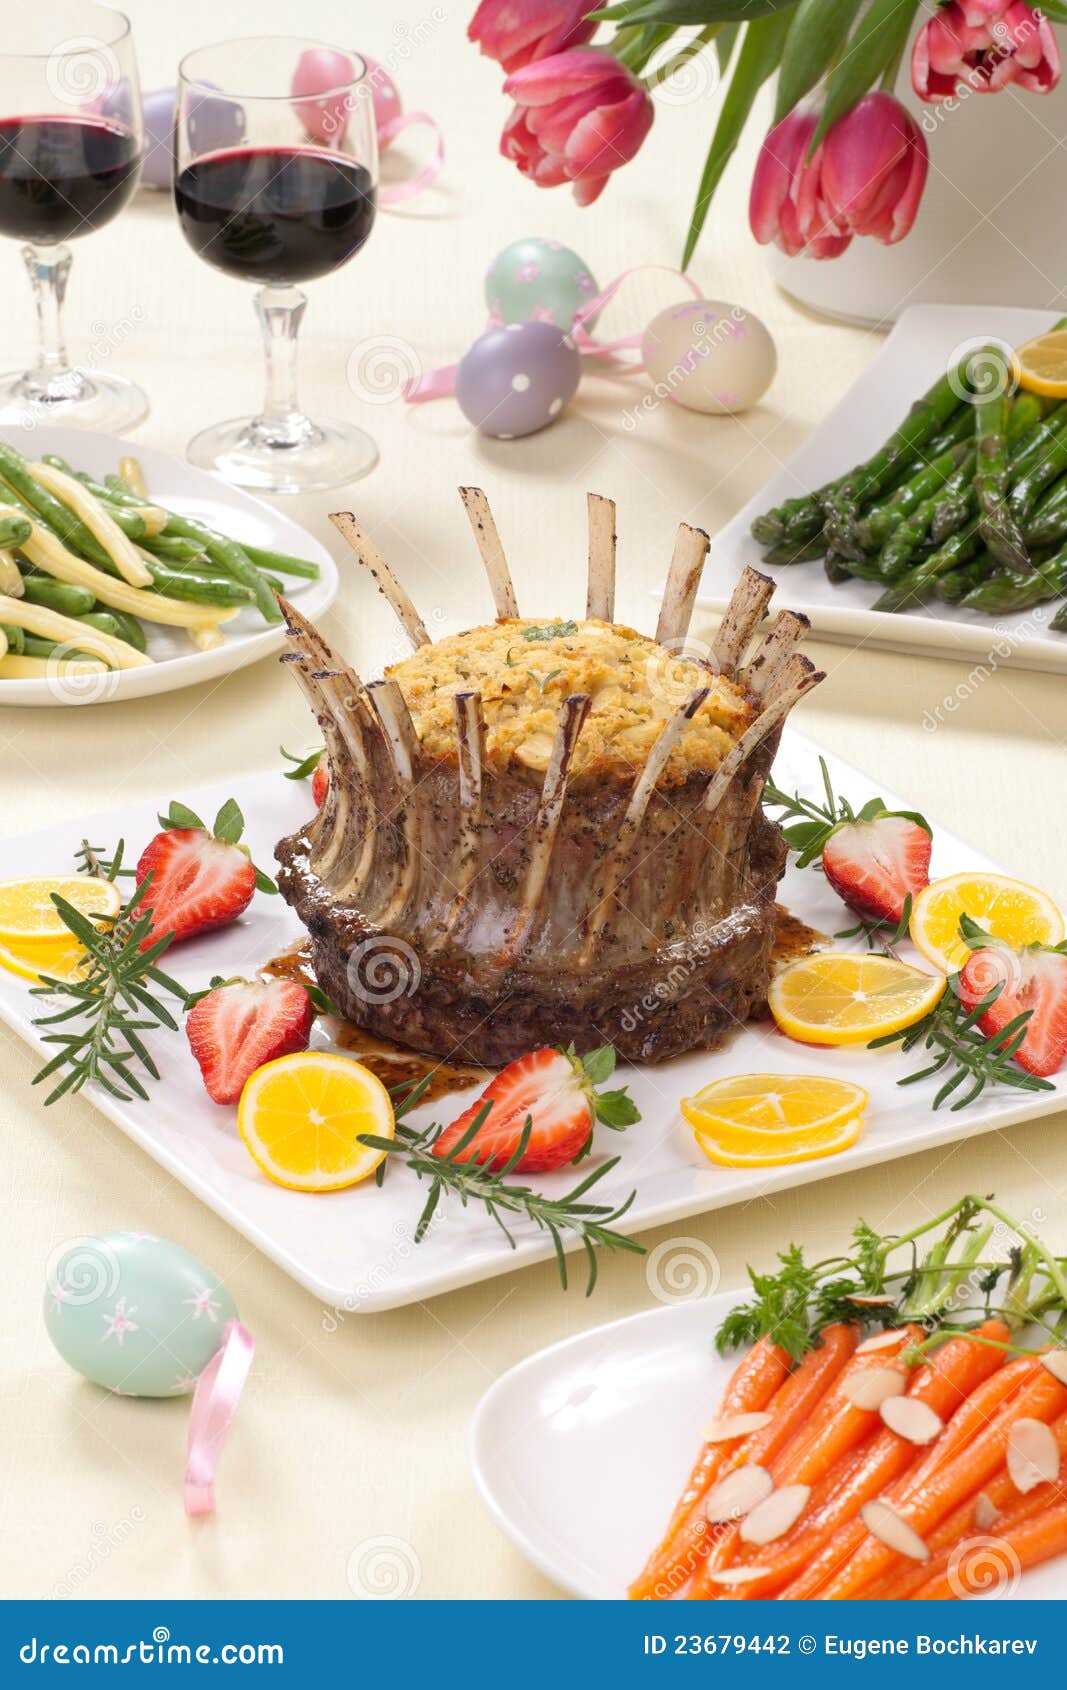 Easter Crown Roast of Lamb stock photo. Image of flowers - 23679442